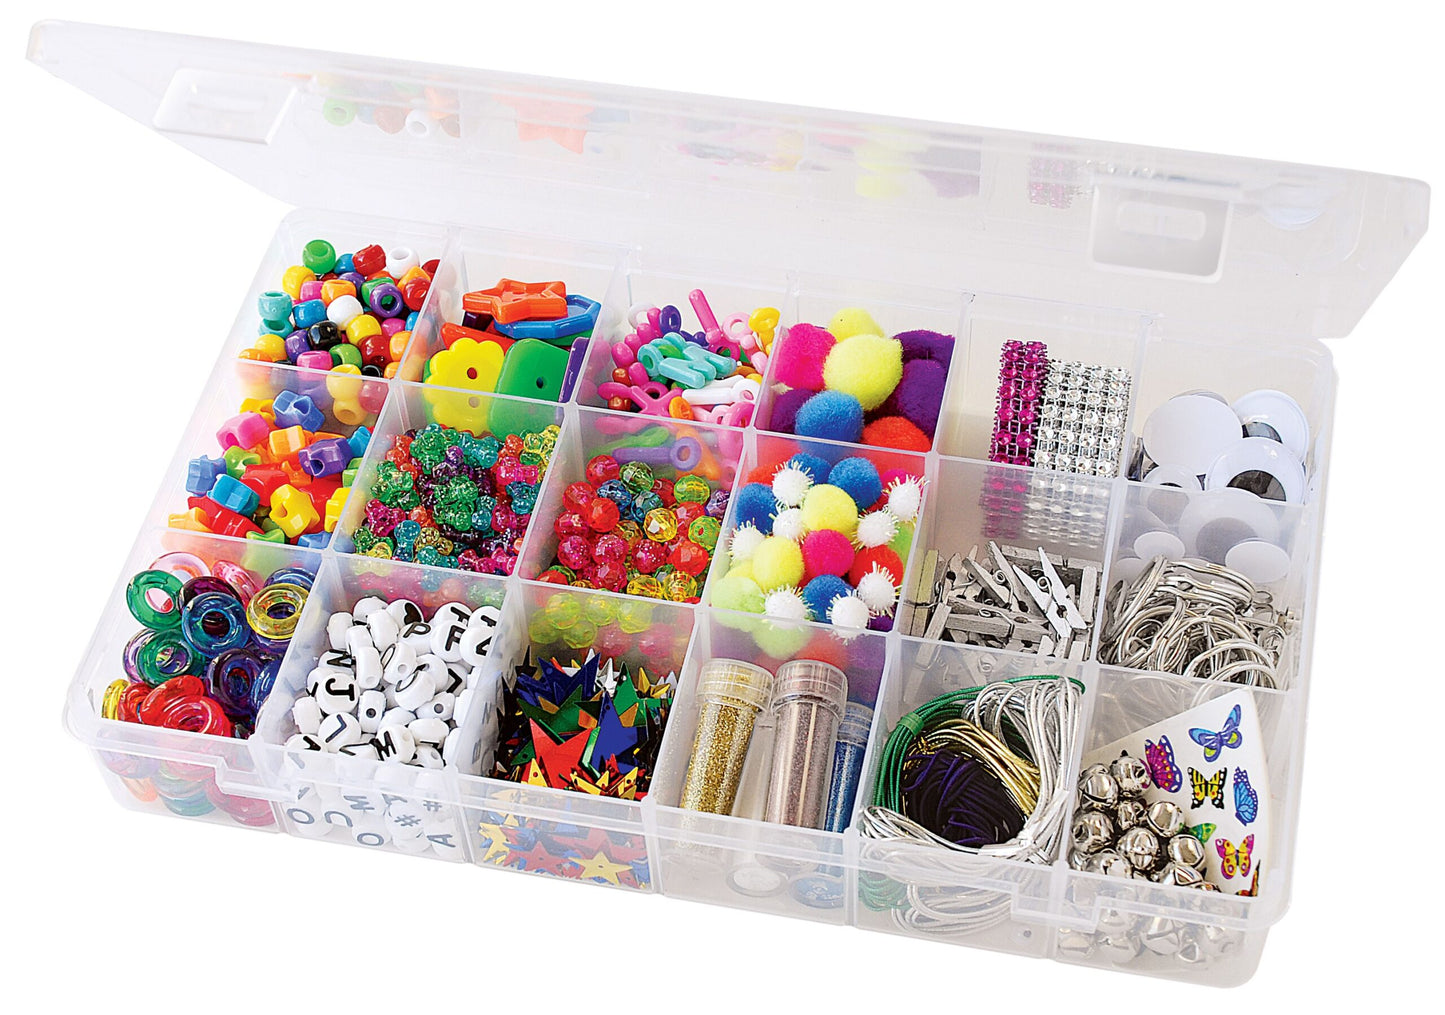 The Beadery 18 Compartment Organizer Box 2182